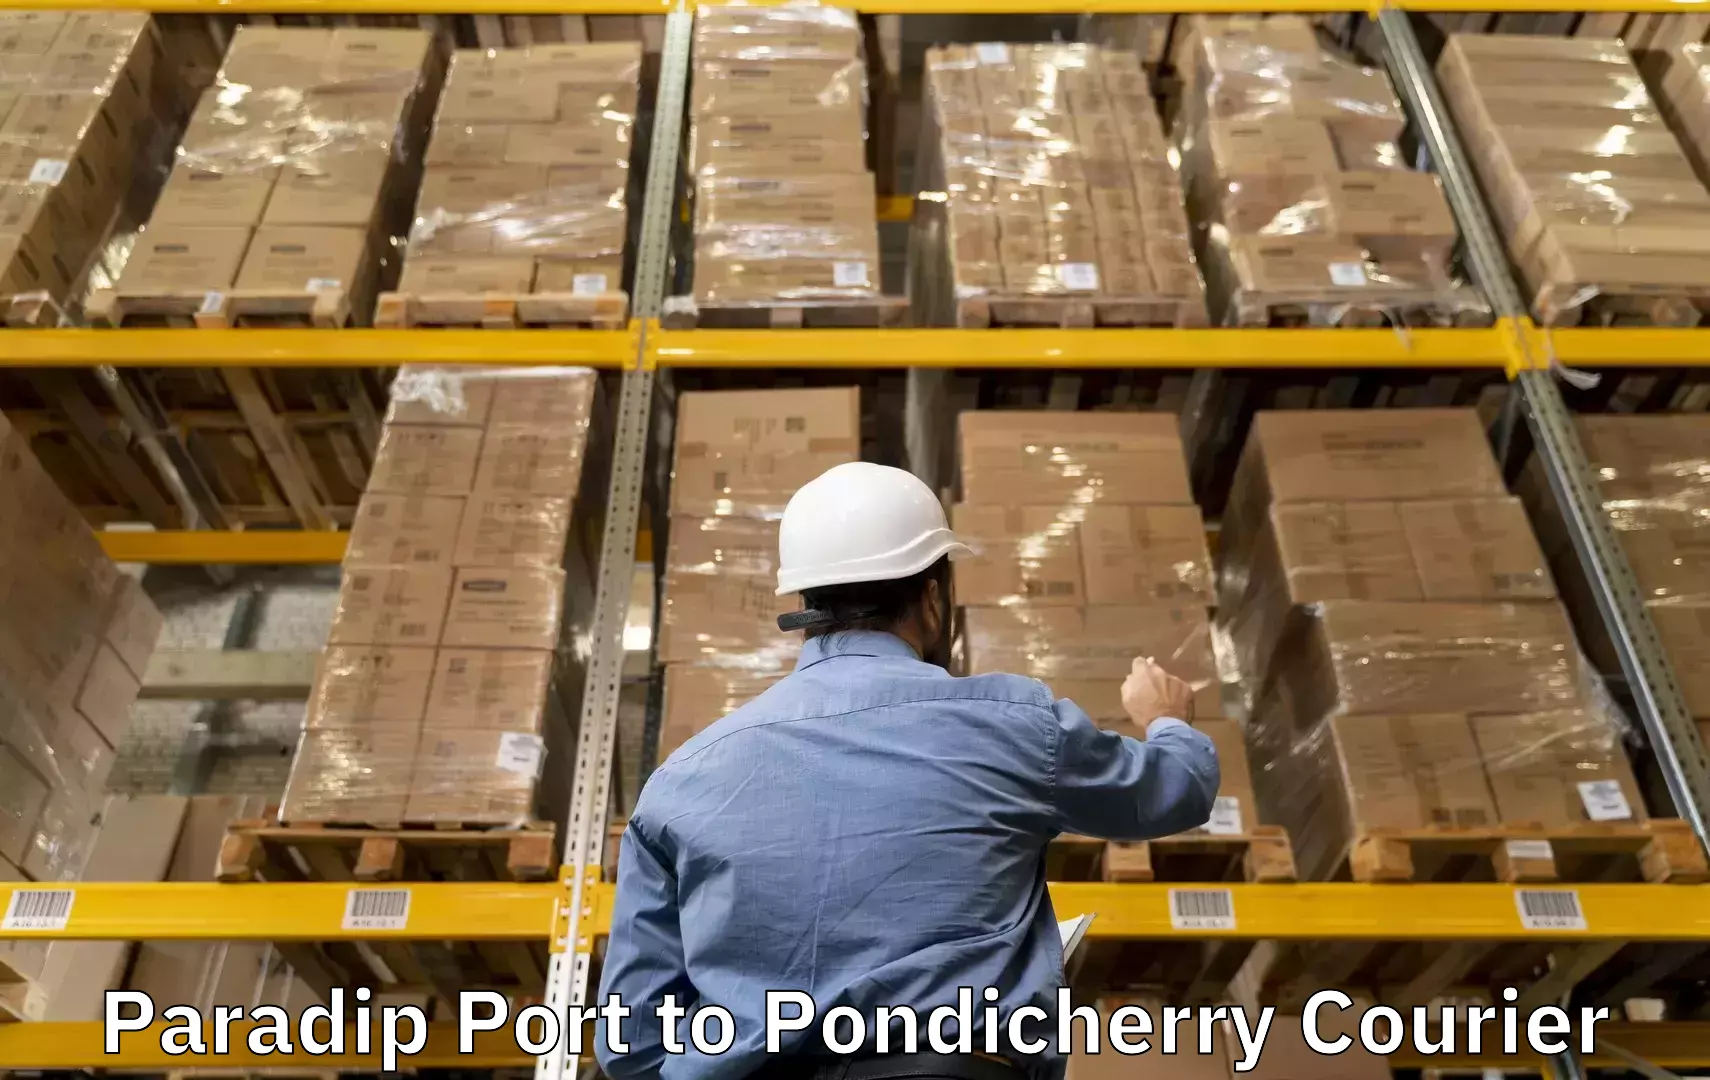 Baggage delivery technology Paradip Port to Pondicherry